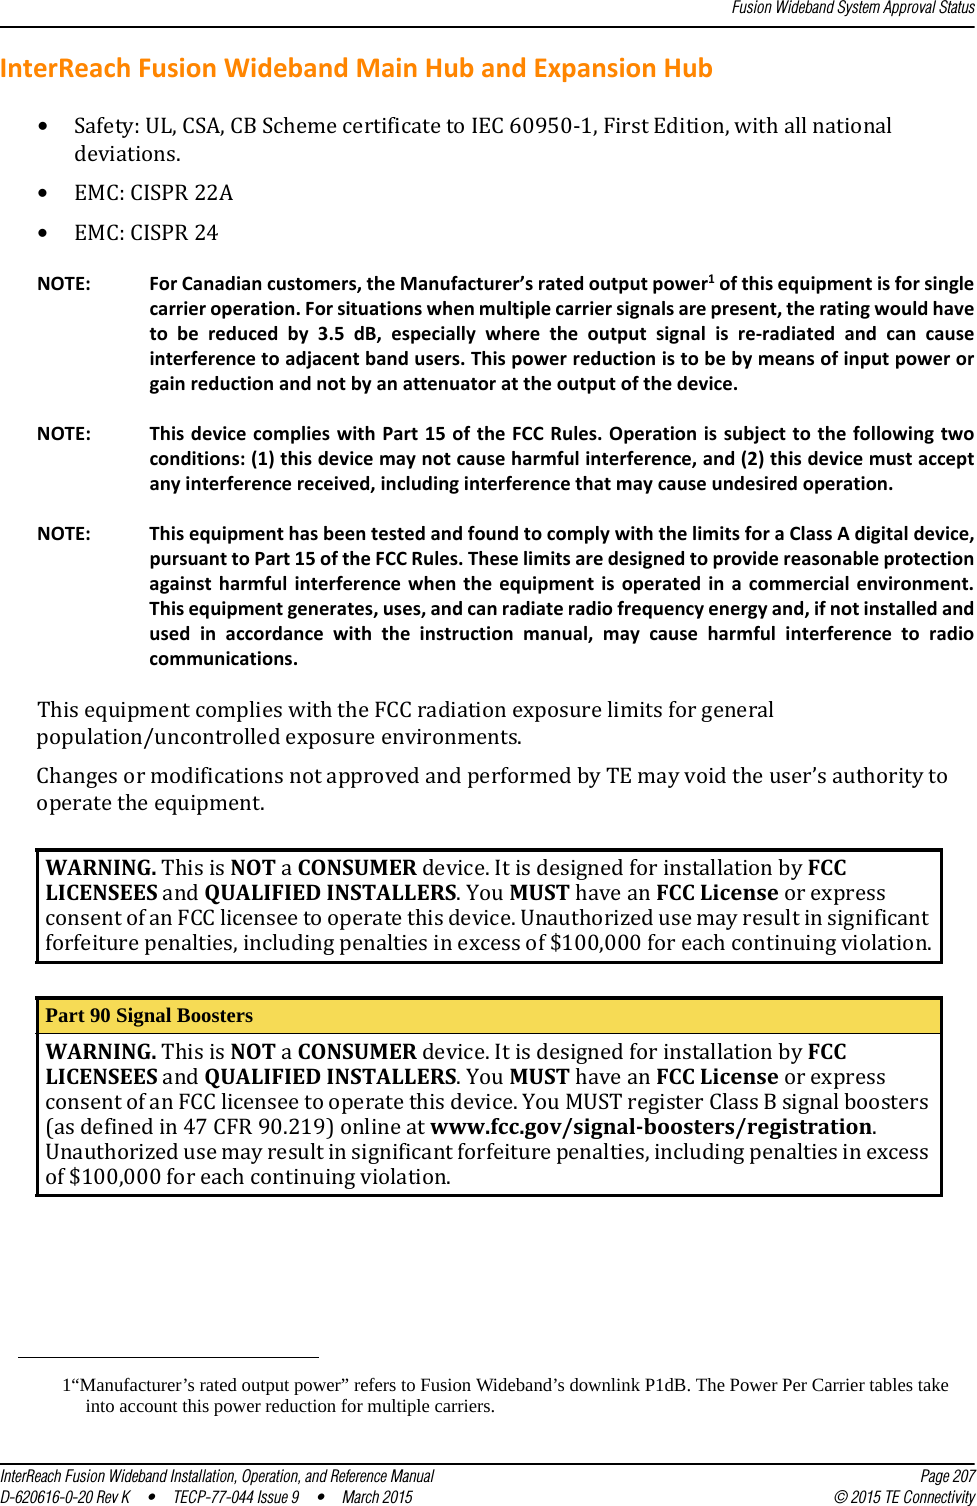 Fusion Wideband System Approval StatusInterReach Fusion Wideband Installation, Operation, and Reference Manual Page 207D-620616-0-20 Rev K  •  TECP-77-044 Issue 9  •  March 2015 © 2015 TE ConnectivityInterReach Fusion Wideband Main Hub and Expansion Hub•Safety: UL, CSA, CB Scheme certificate to IEC 60950-1, First Edition, with all national deviations.•EMC: CISPR 22A•EMC: CISPR 24NOTE: For Canadian customers, the Manufacturer’s rated output power1 of this equipment is for single carrier operation. For situations when multiple carrier signals are present, the rating would have to be reduced by 3.5 dB, especially where the output signal is re-radiated and can cause interference to adjacent band users. This power reduction is to be by means of input power or gain reduction and not by an attenuator at the output of the device.NOTE: This device complies with Part 15 of the FCC Rules. Operation is subject to the following two conditions: (1) this device may not cause harmful interference, and (2) this device must accept any interference received, including interference that may cause undesired operation.NOTE: This equipment has been tested and found to comply with the limits for a Class A digital device, pursuant to Part 15 of the FCC Rules. These limits are designed to provide reasonable protection against harmful interference when the equipment is operated in a commercial environment. This equipment generates, uses, and can radiate radio frequency energy and, if not installed and used in accordance with the instruction manual, may cause harmful interference to radio communications.This equipment complies with the FCC radiation exposure limits for general population/uncontrolled exposure environments.Changes or modifications not approved and performed by TE may void the user’s authority to operate the equipment.1“Manufacturer’s rated output power” refers to Fusion Wideband’s downlink P1dB. The Power Per Carrier tables take into account this power reduction for multiple carriers.WARNING. This is NOT a CONSUMER device. It is designed for installation by FCC  LICENSEES and QUALIFIED INSTALLERS. You MUST have an FCC License or express  consent of an FCC licensee to operate this device. Unauthorized use may result in significant forfeiture penalties, including penalties in excess of $100,000 for each continuing violation.Part 90 Signal BoostersWARNING. This is NOT a CONSUMER device. It is designed for installation by FCC  LICENSEES and QUALIFIED INSTALLERS. You MUST have an FCC License or express  consent of an FCC licensee to operate this device. You MUST register Class B signal boosters (as defined in 47 CFR 90.219) online at www.fcc.gov/signal-boosters/registration.  Unauthorized use may result in significant forfeiture penalties, including penalties in excess of $100,000 for each continuing violation.